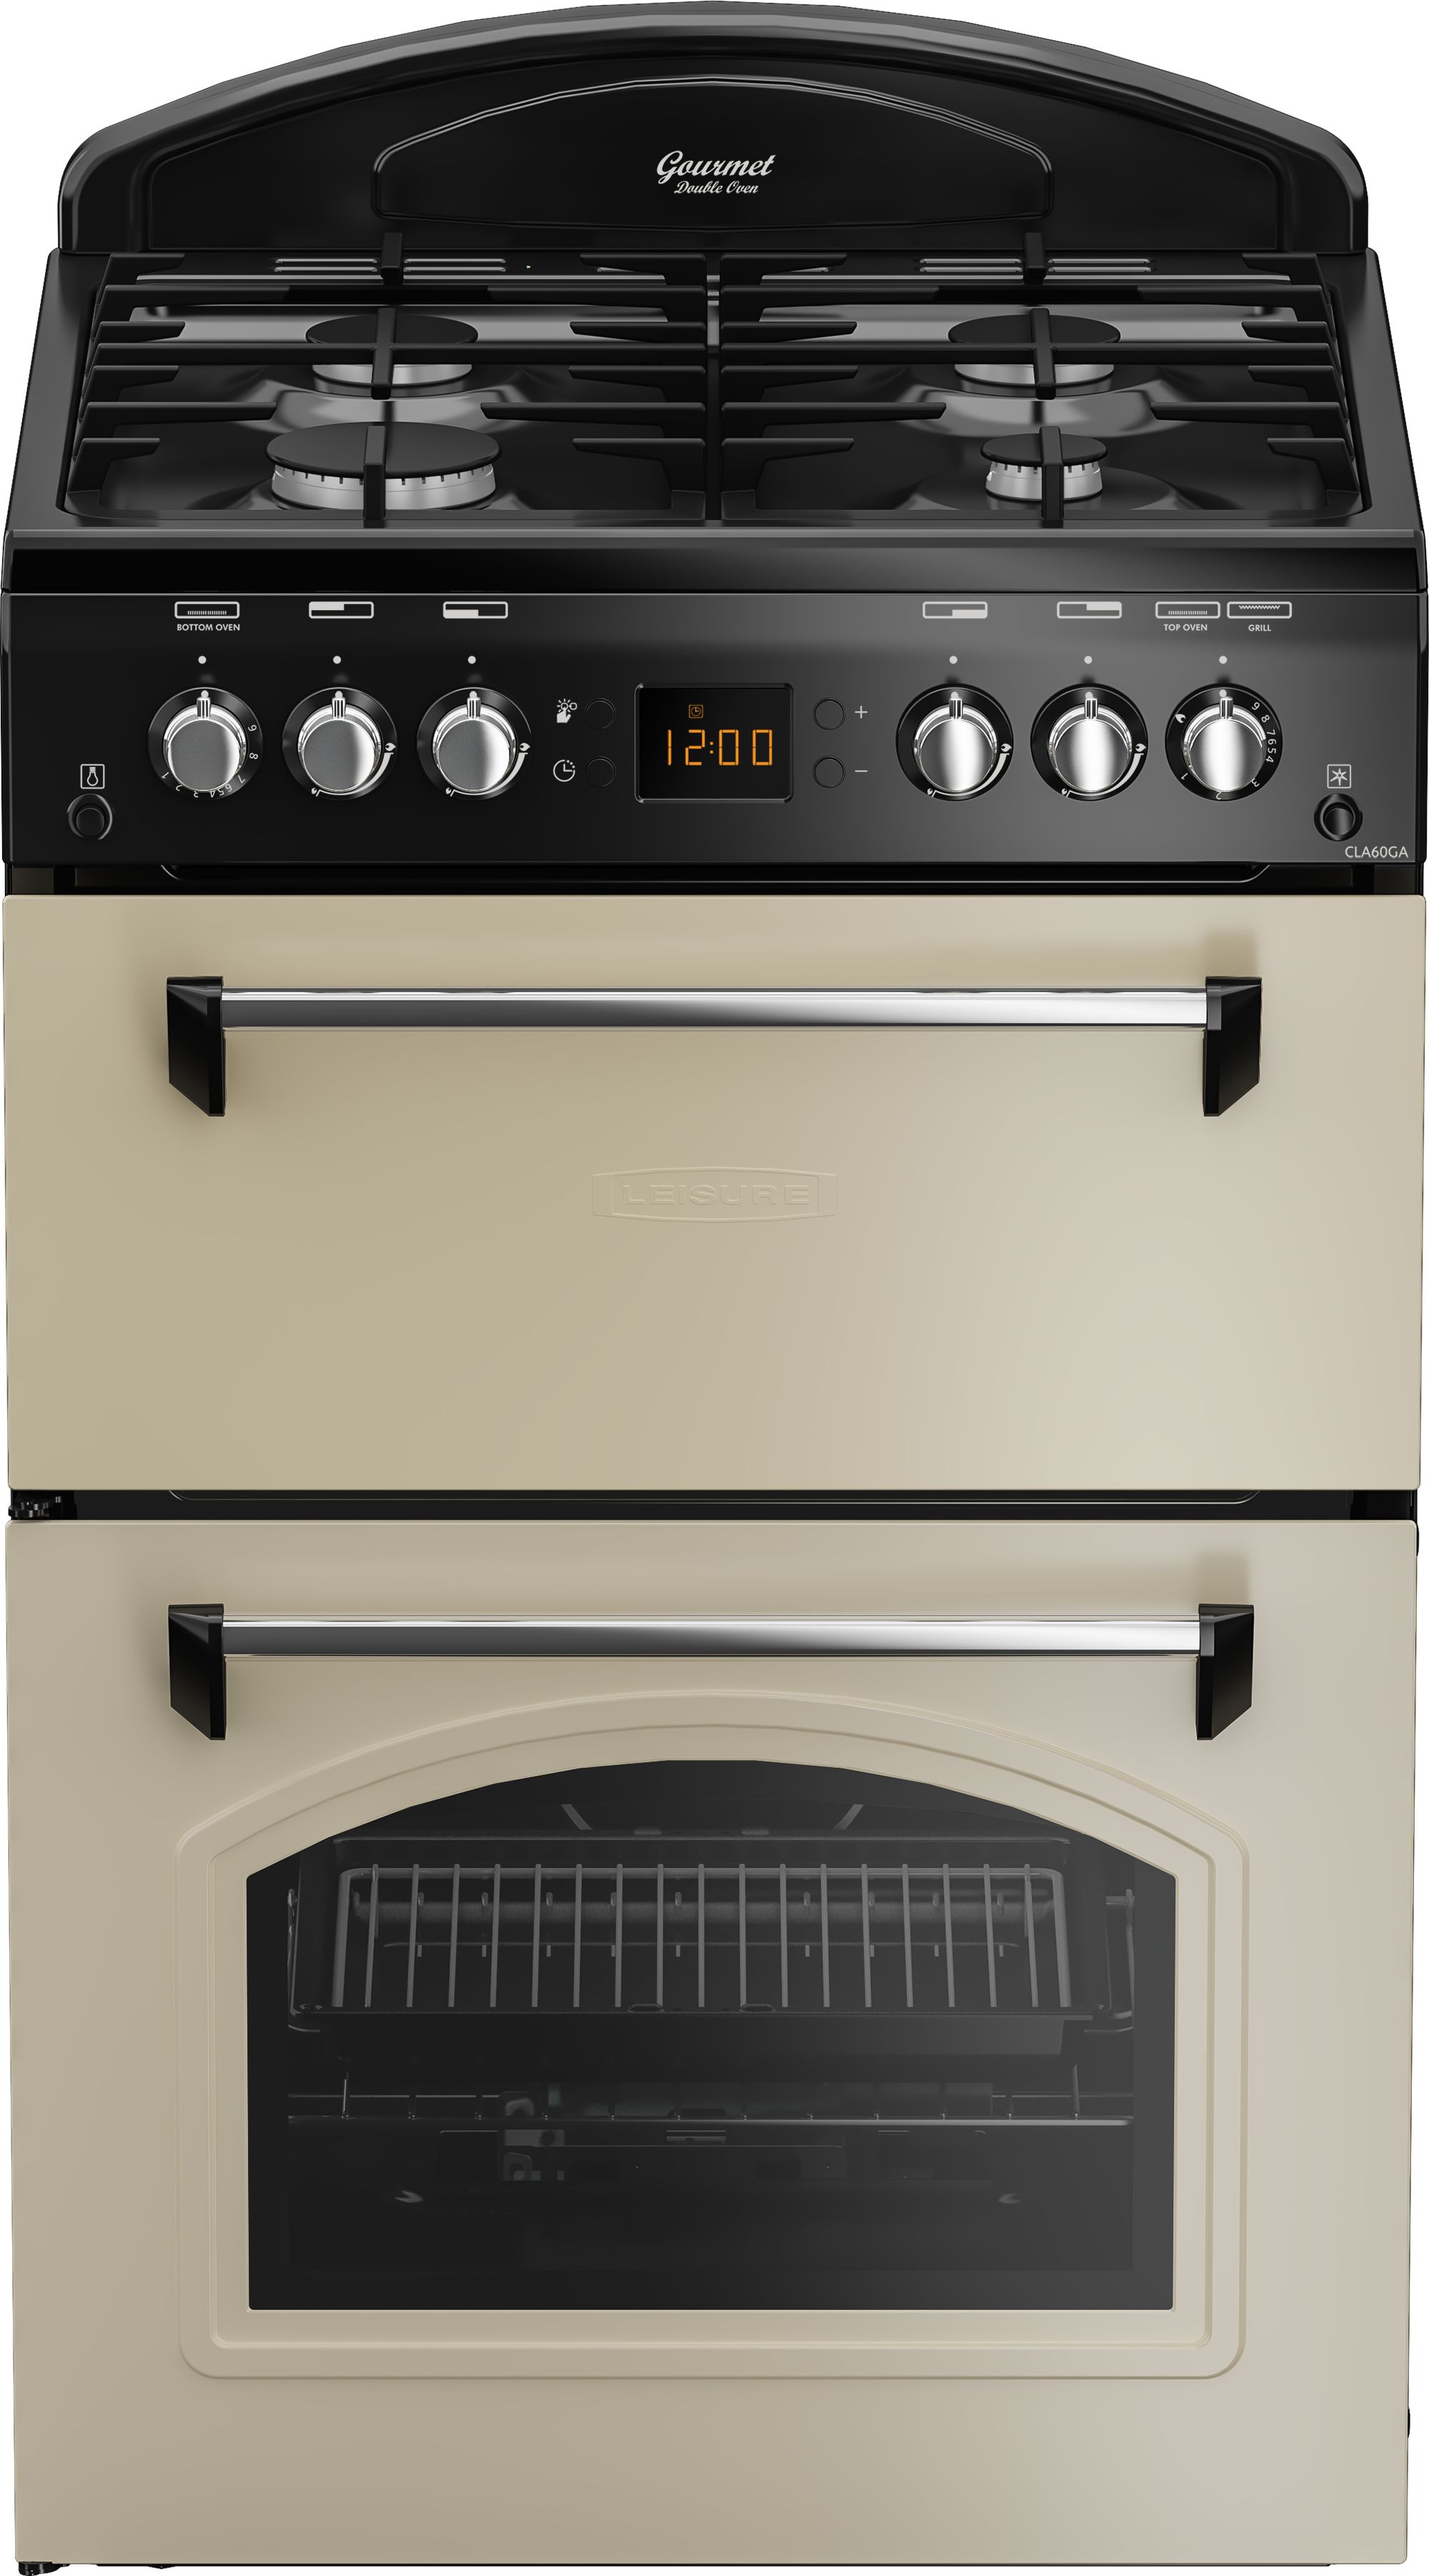 Leisure CLA60GAC 60cm Freestanding Gas Cooker with Variable grill - Cream - A+ Rated, Cream